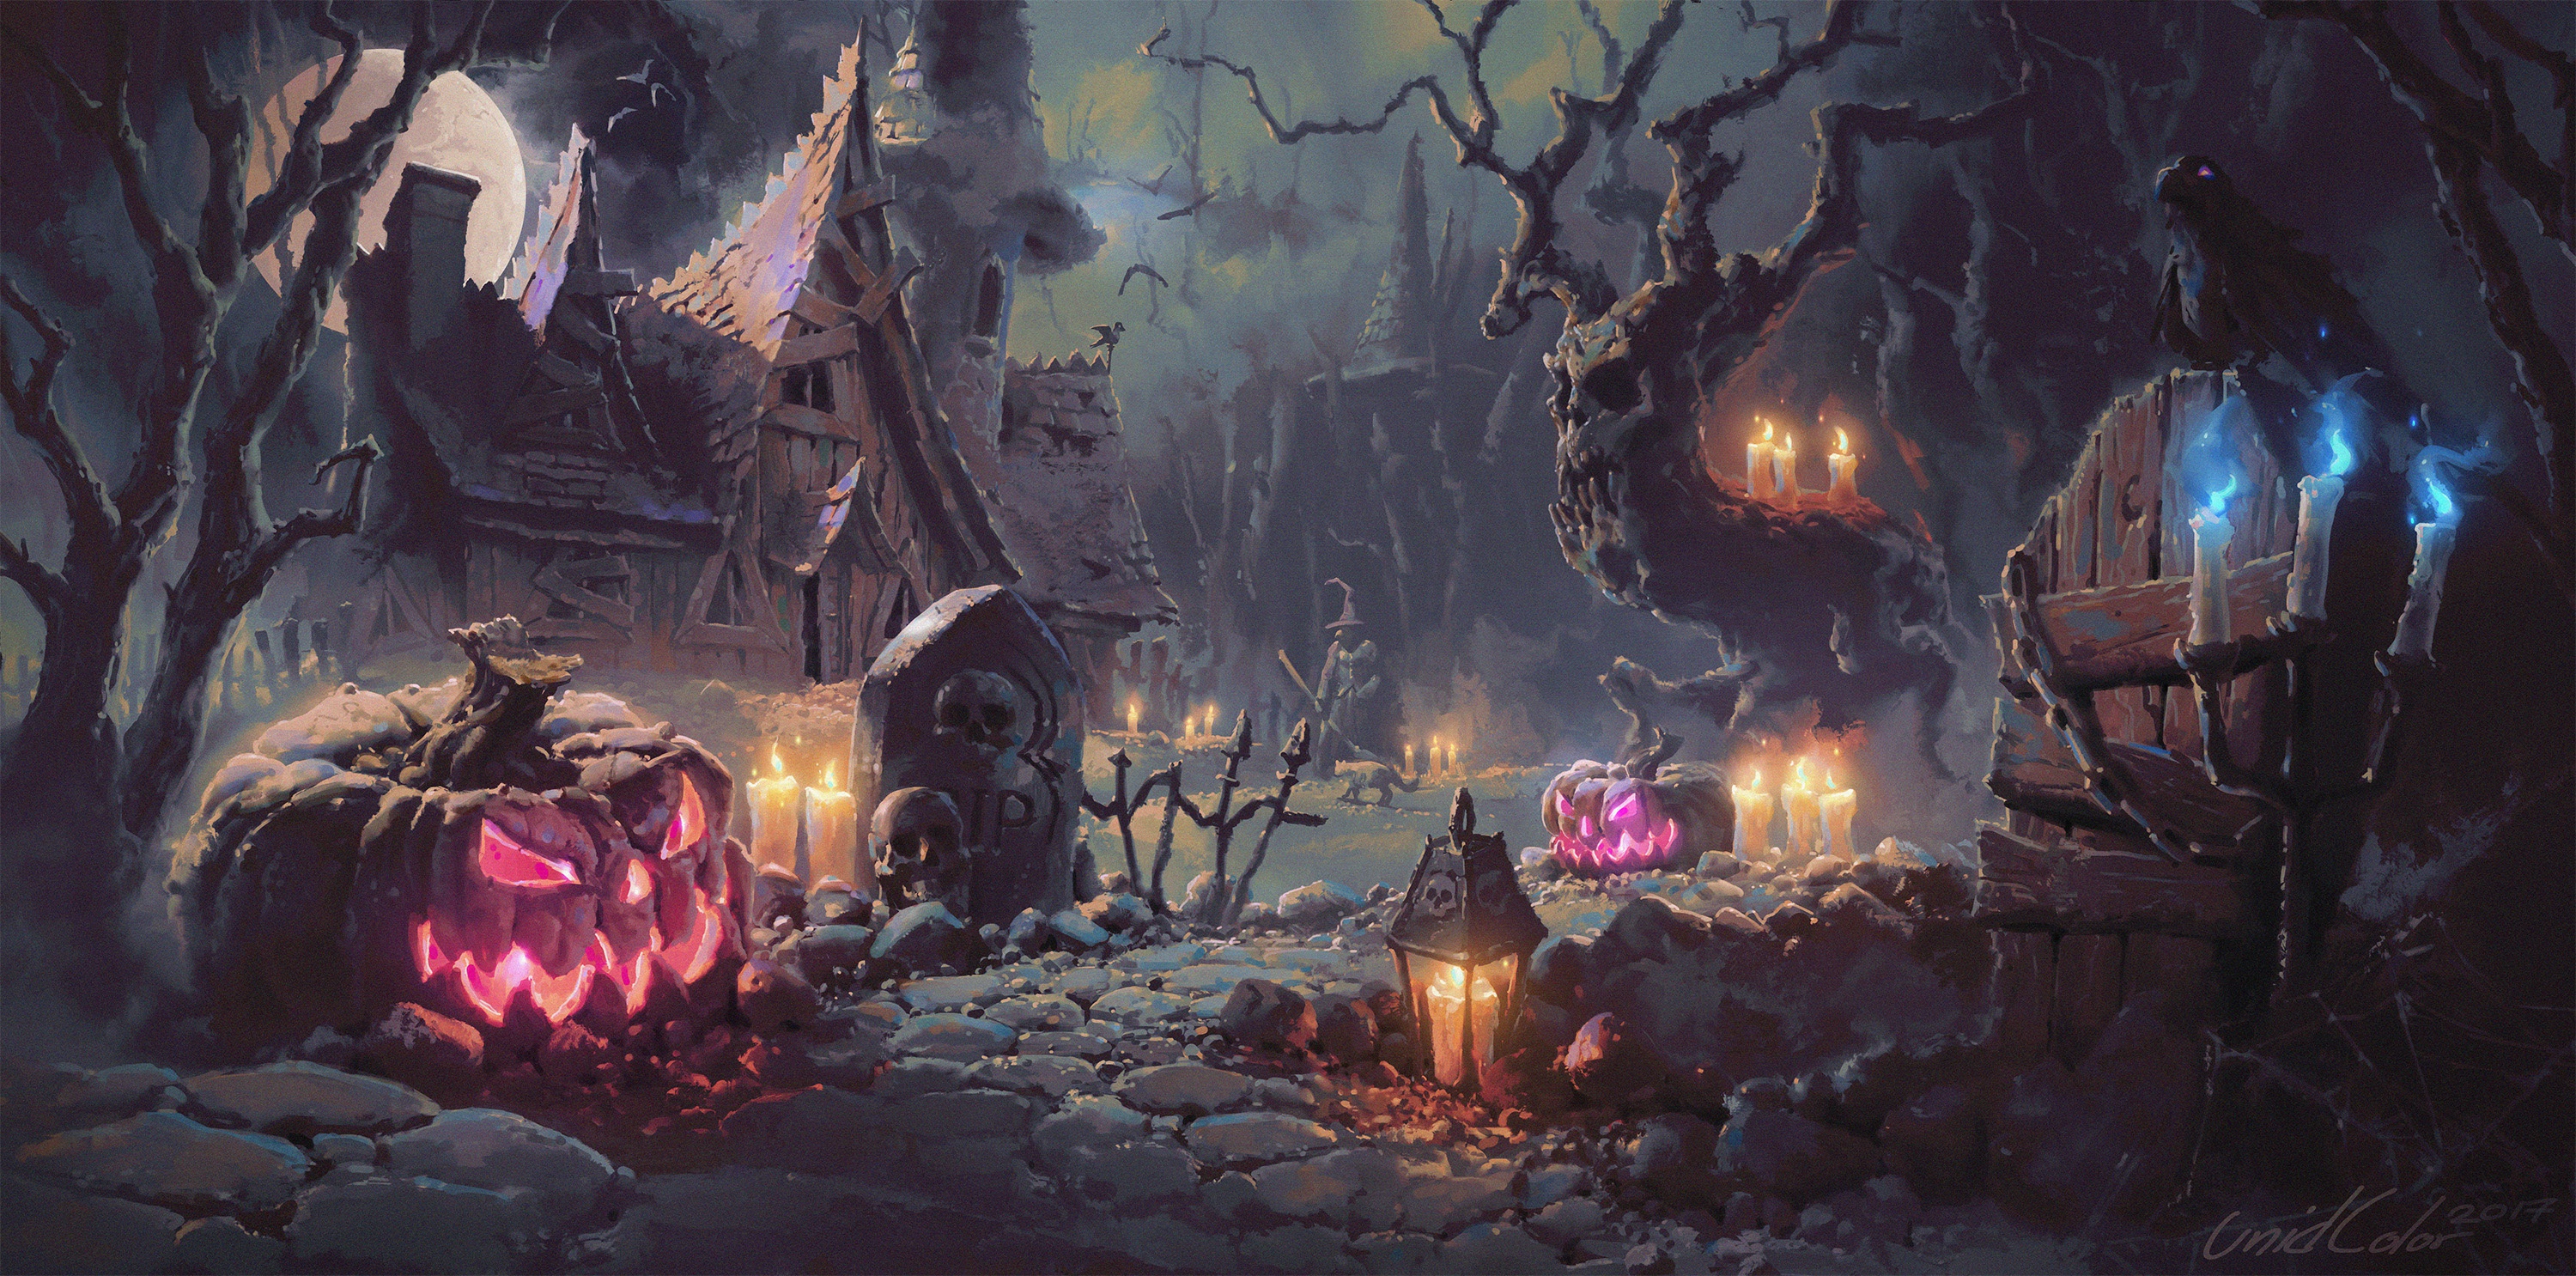 Holiday Halloween HD Wallpaper | Background Image